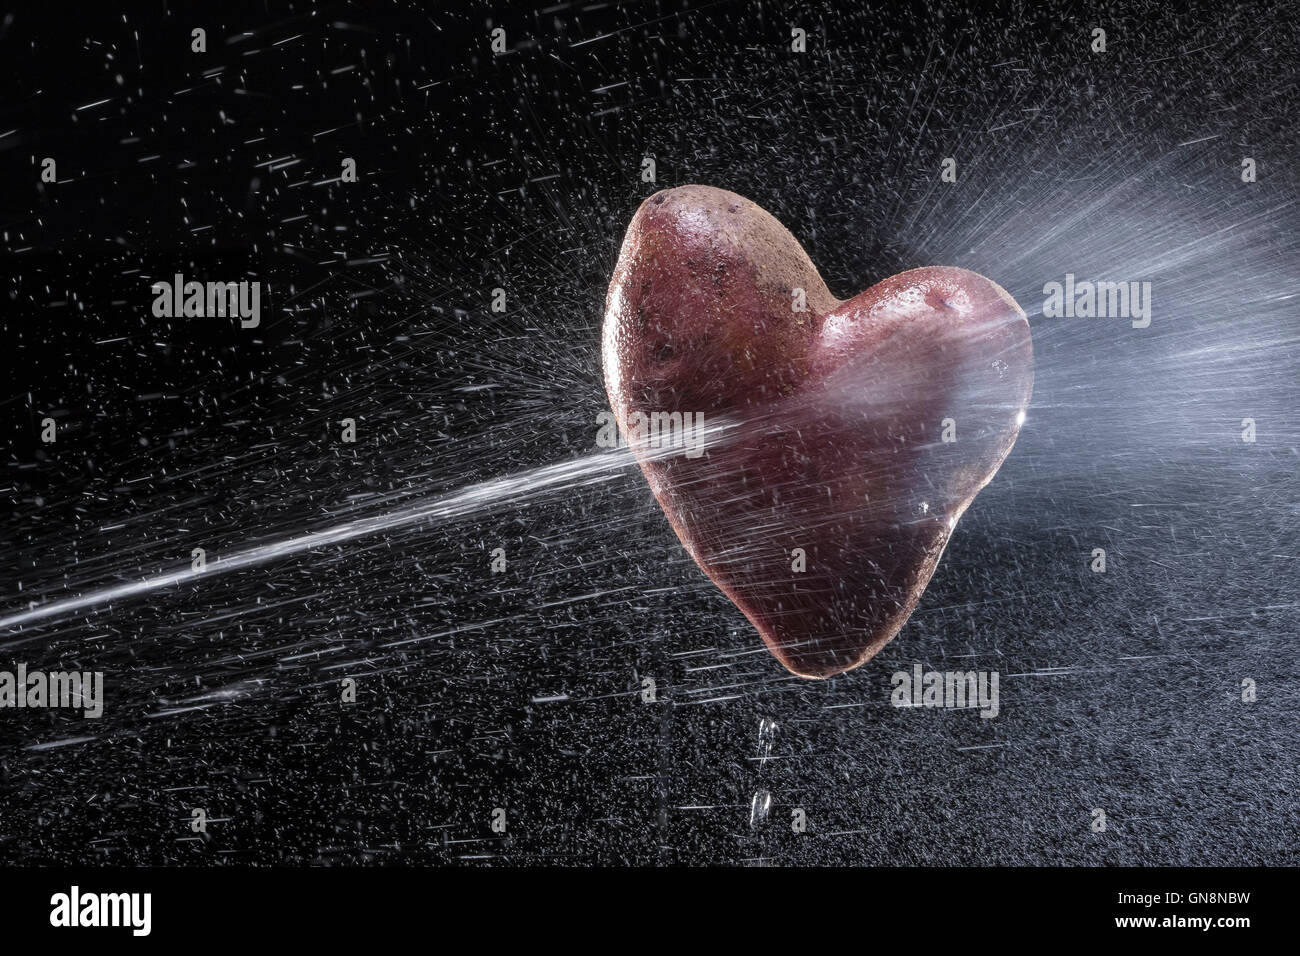 Potatoes in the form of heart. On a black background. A series of fruits and vegetables in motion. Valentine's Day Stock Photo